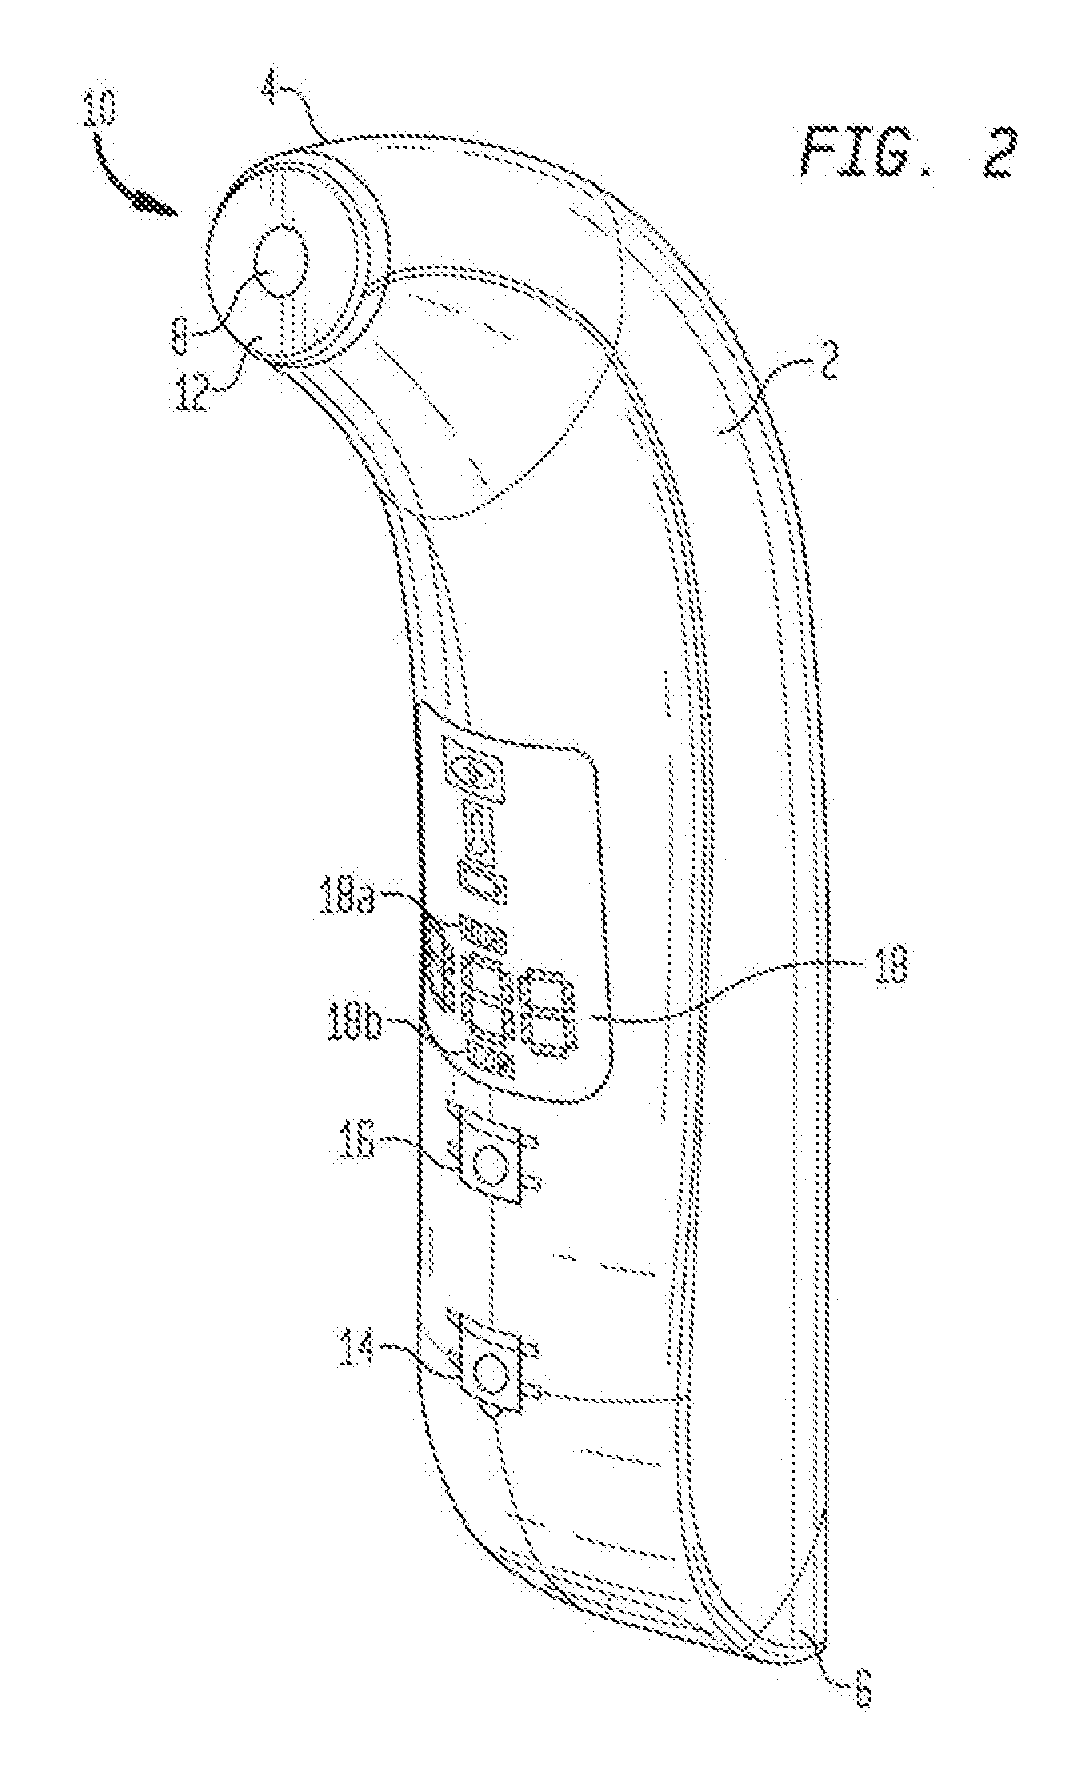 Handholdable laser device featuring pulsing of a continuous wave laser